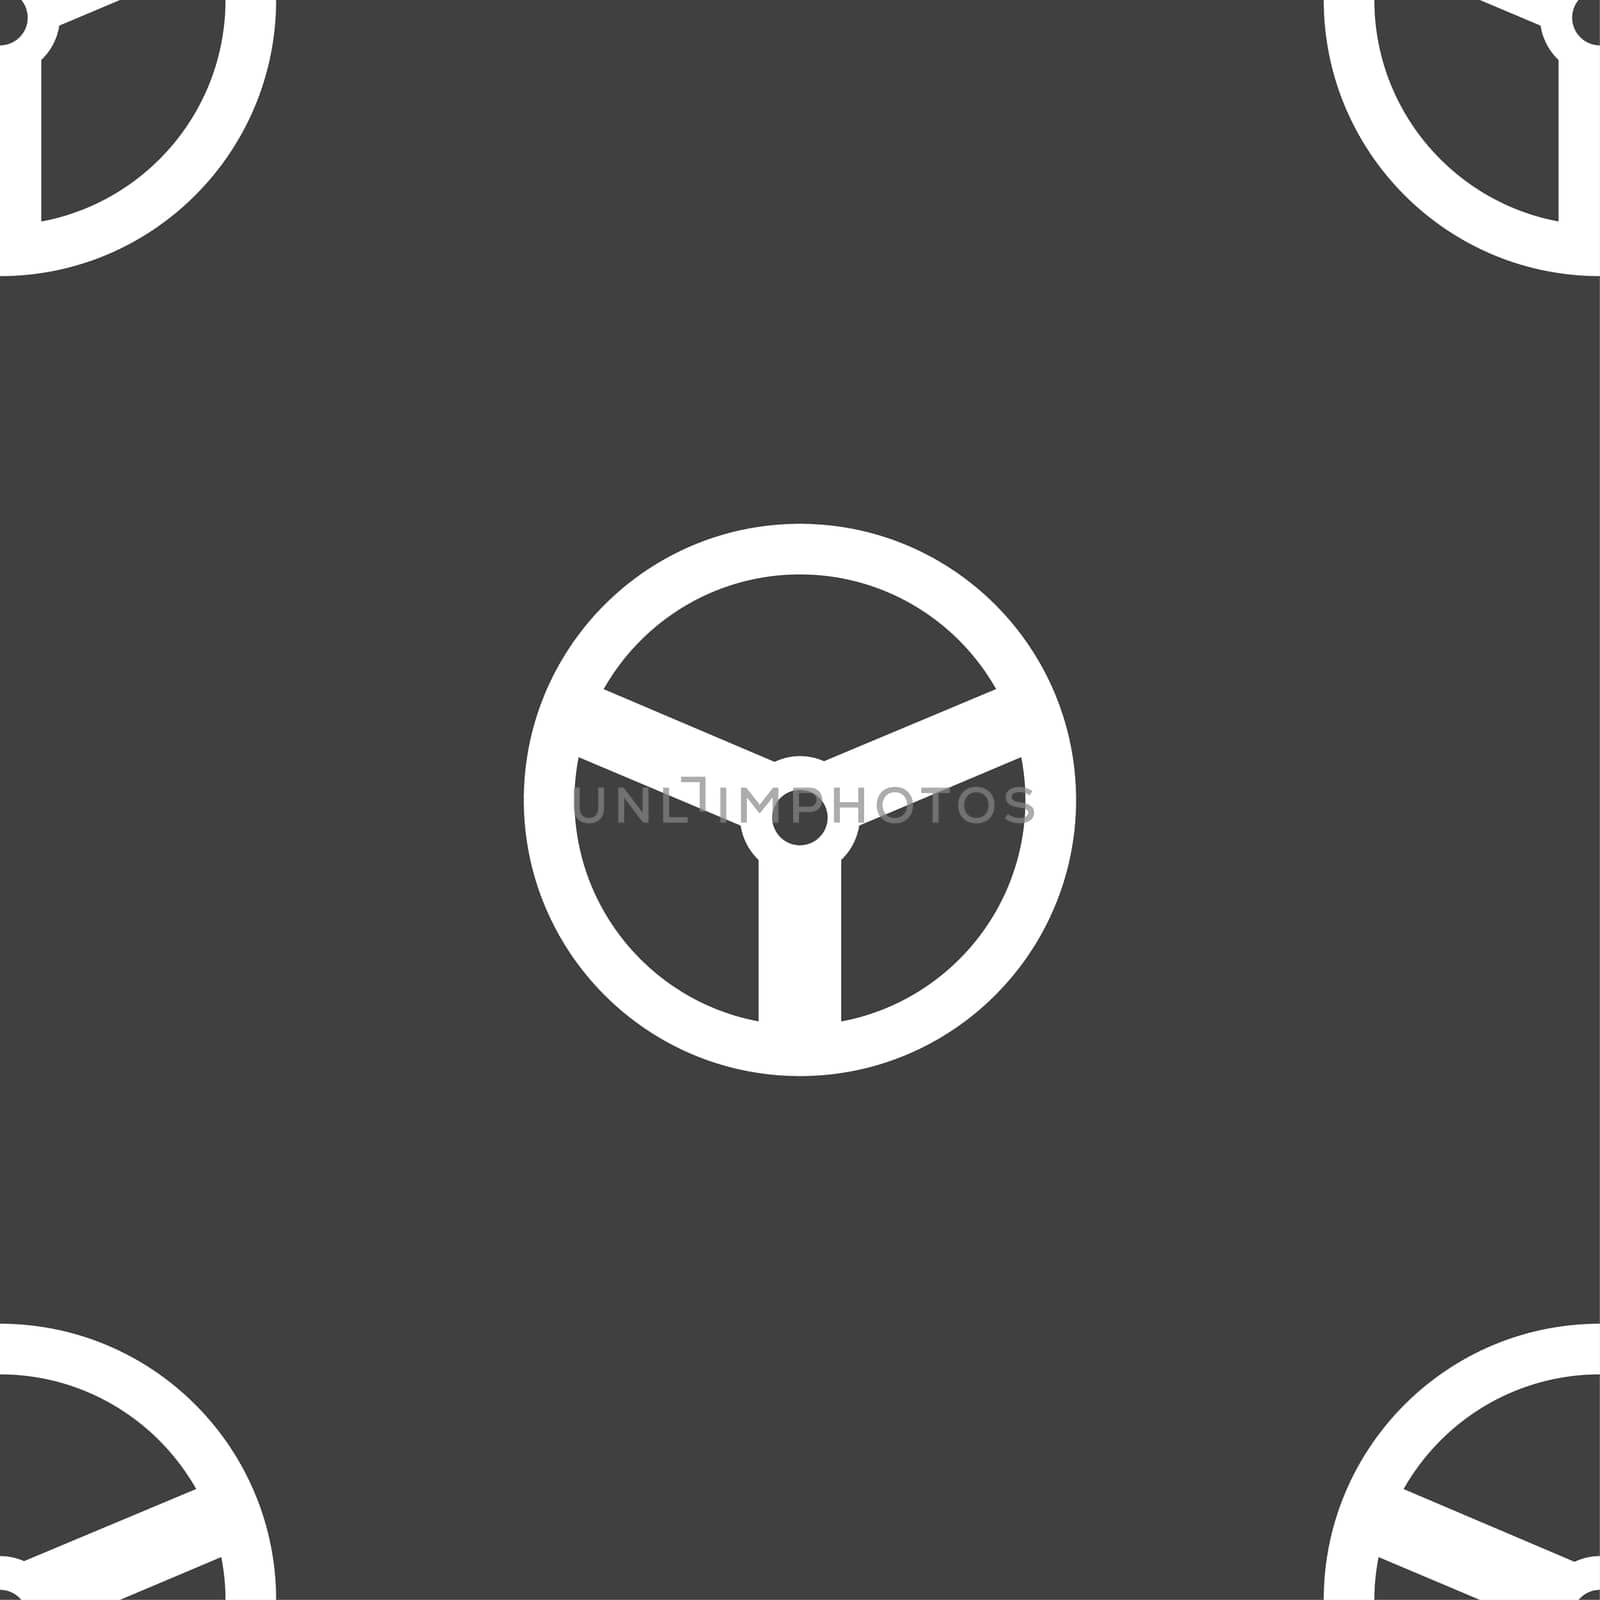 Steering wheel icon sign. Seamless pattern on a gray background. illustration